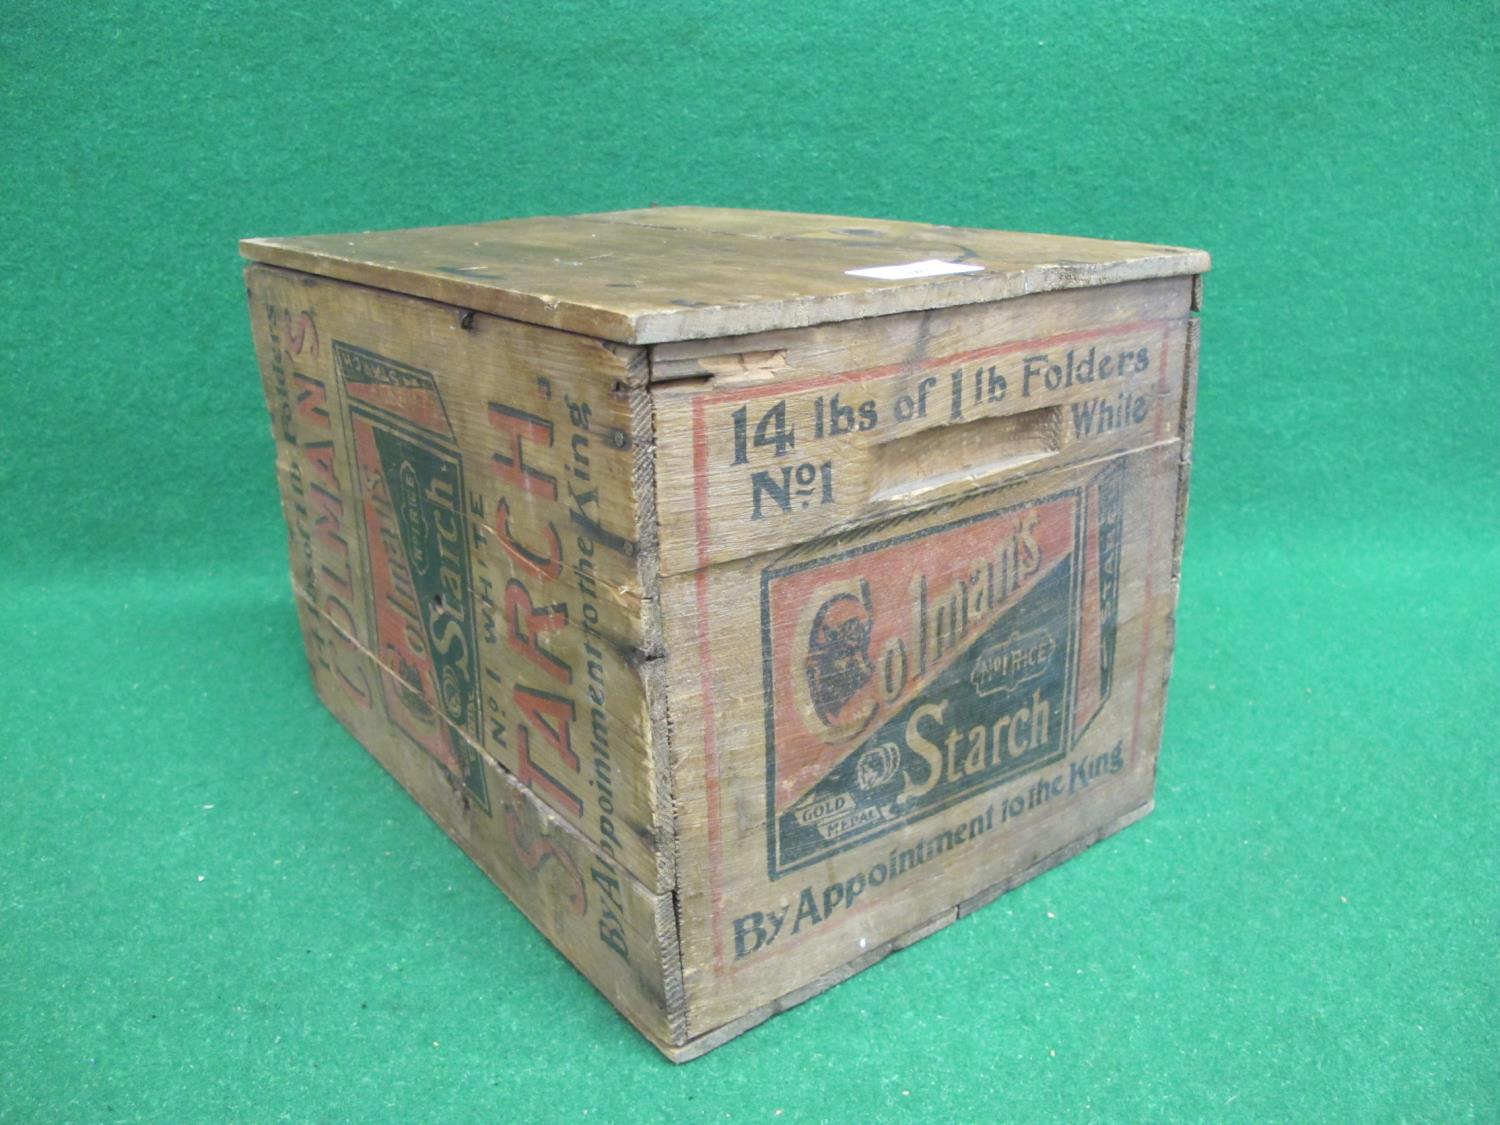 Theatrical non-opening, aged, wooden box printed on four sides for Colman's Starch 14lb of 1lb